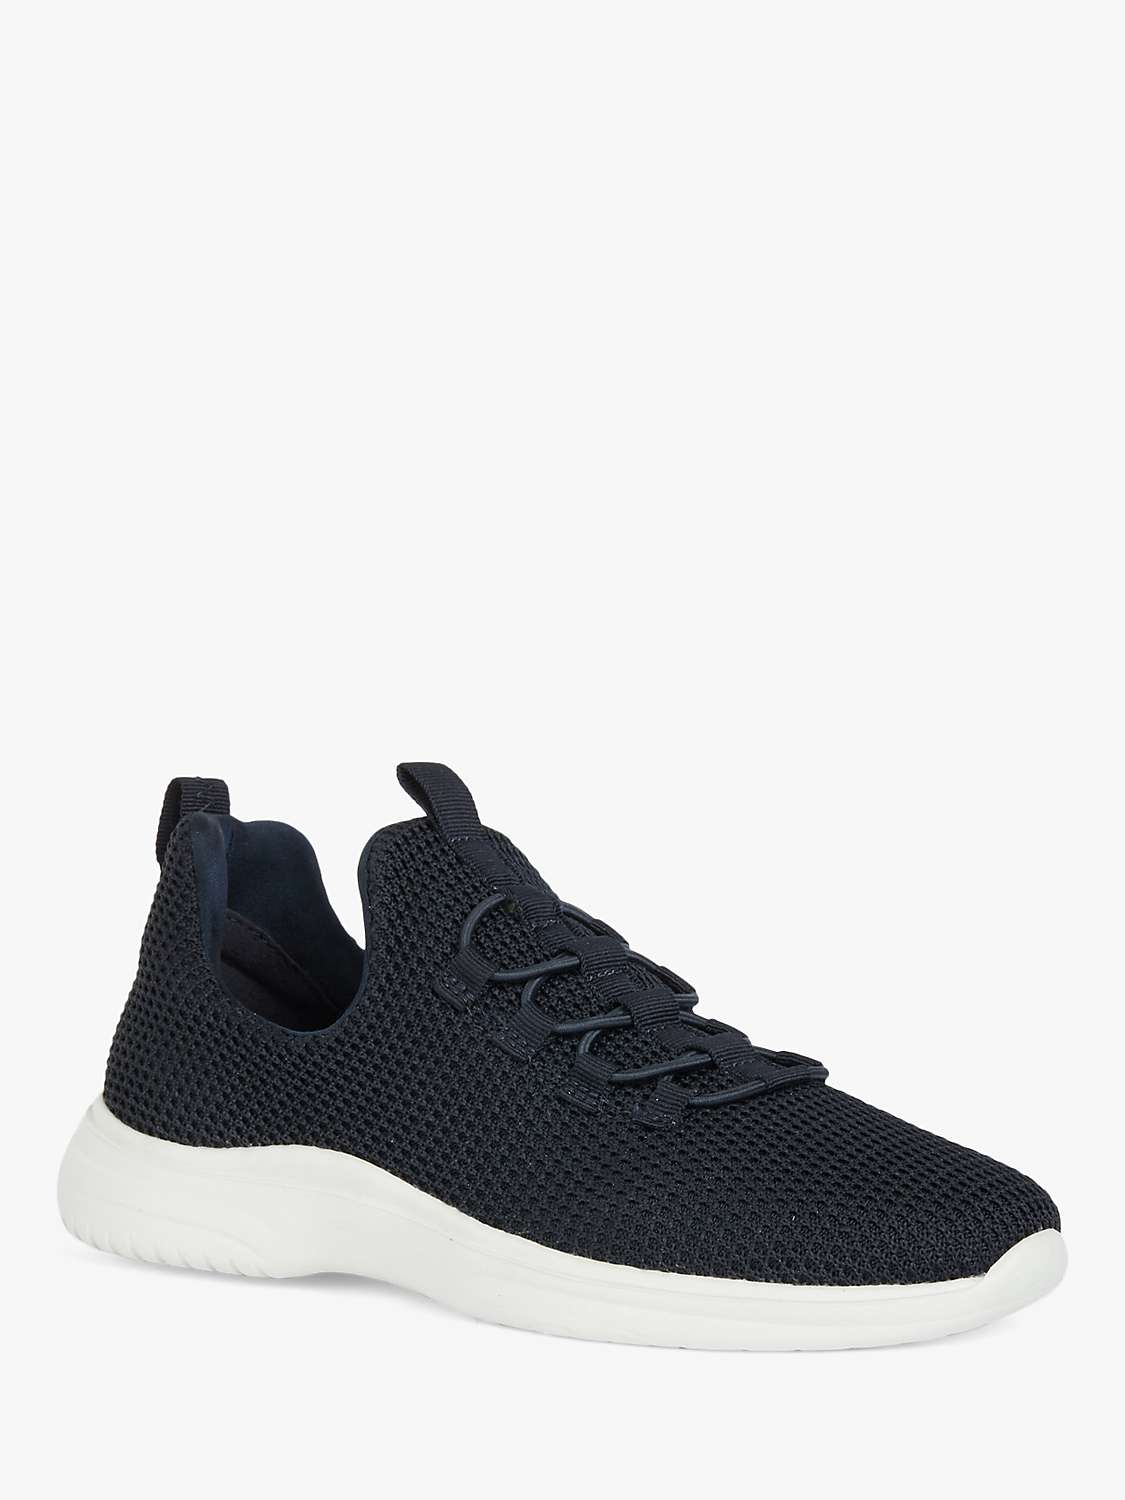 Buy Geox Women's Pillow Wide Fit Knitted Trainers Online at johnlewis.com